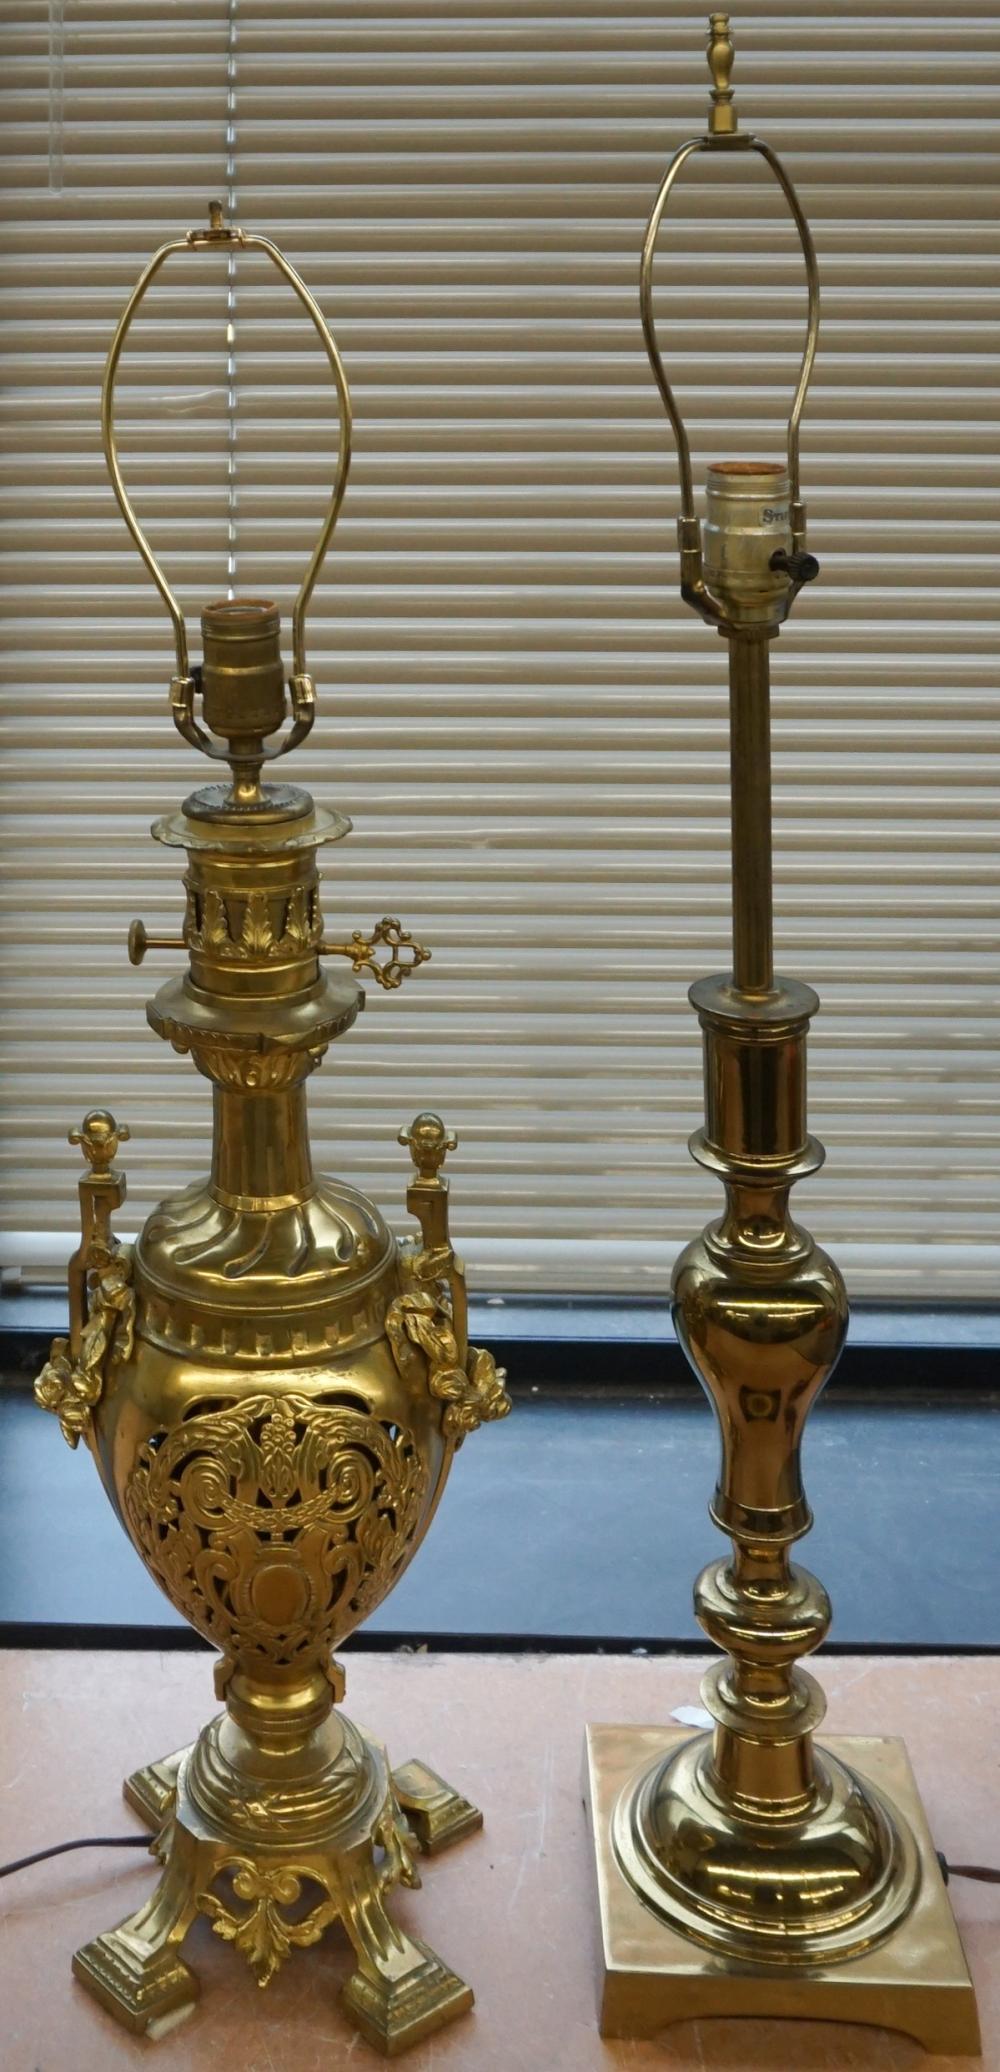 TWO BRASS TABLE LAMPS, H OF TALLER: